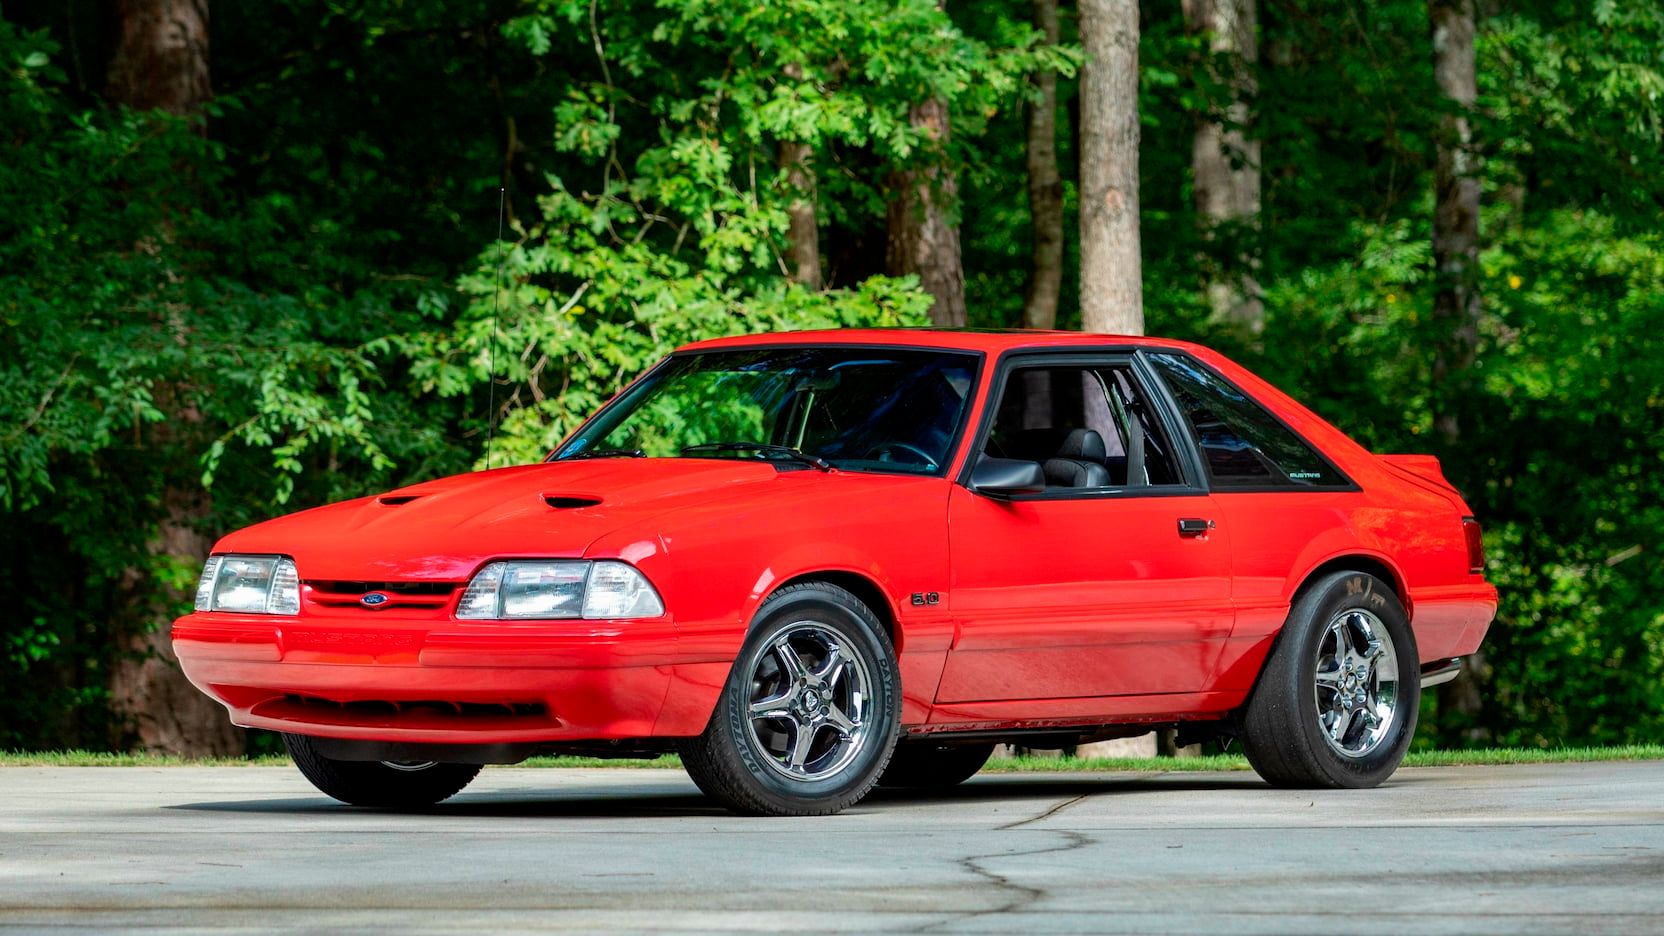 A parked red 1993 Ford Mustang LX